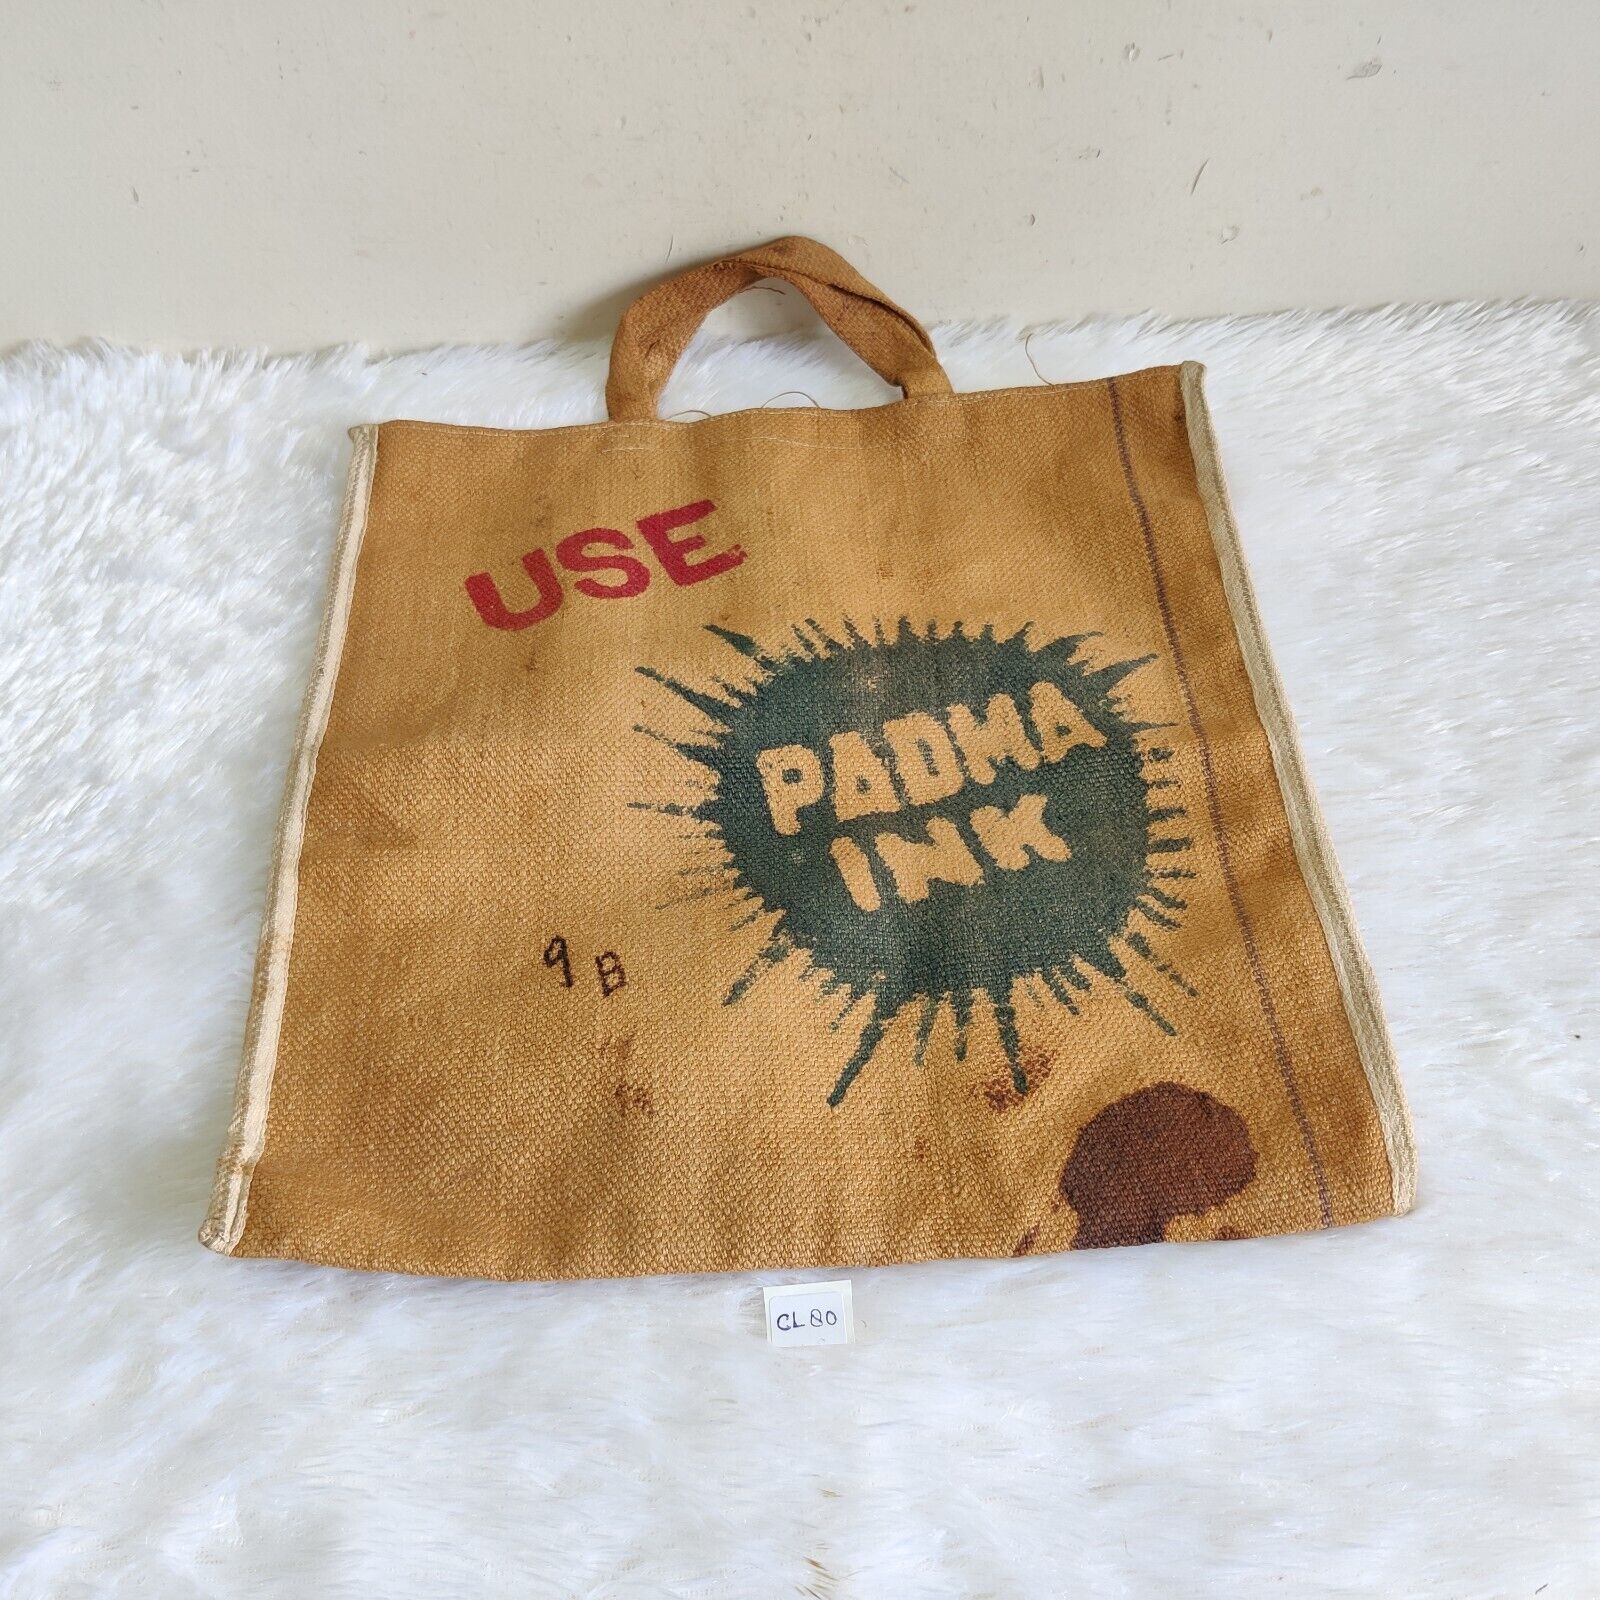 1940s Vintage Use Padma Ink Advertising Cloth Bag Old Collectible Rare CL80